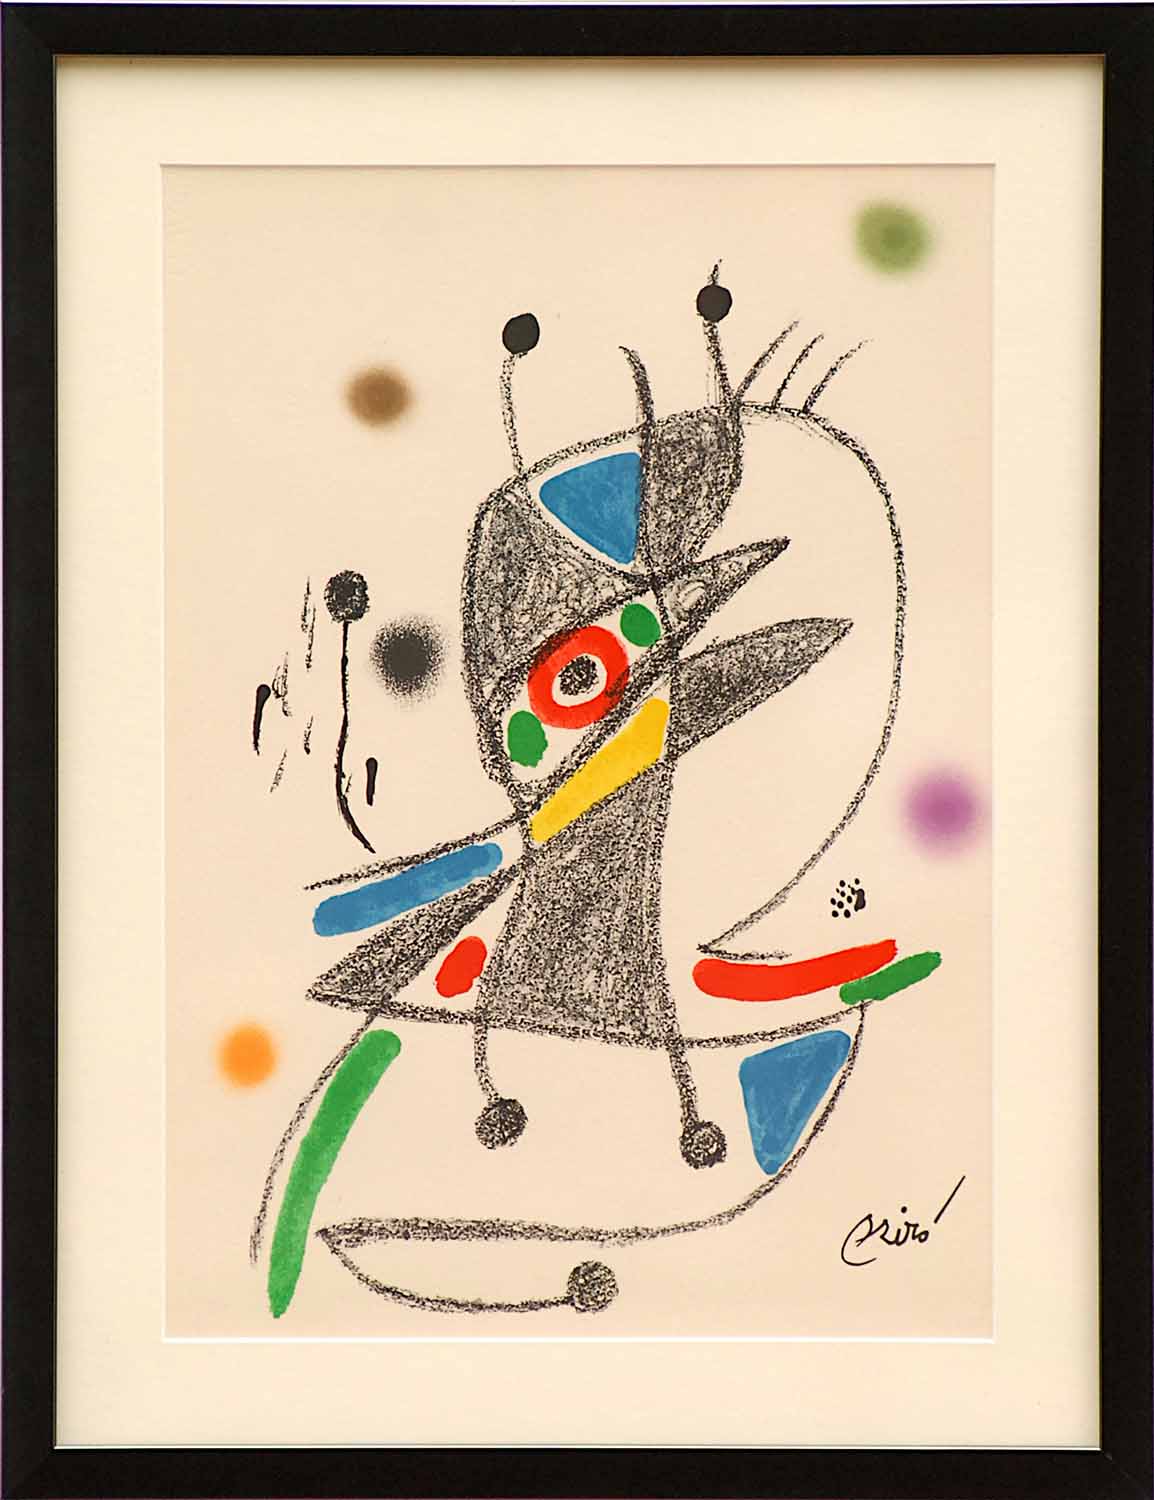 JOAN MIRO, 'Untitled Maravillas suite', lithograph, signed in the plate, 1975, 48cm x 34cm, framed.